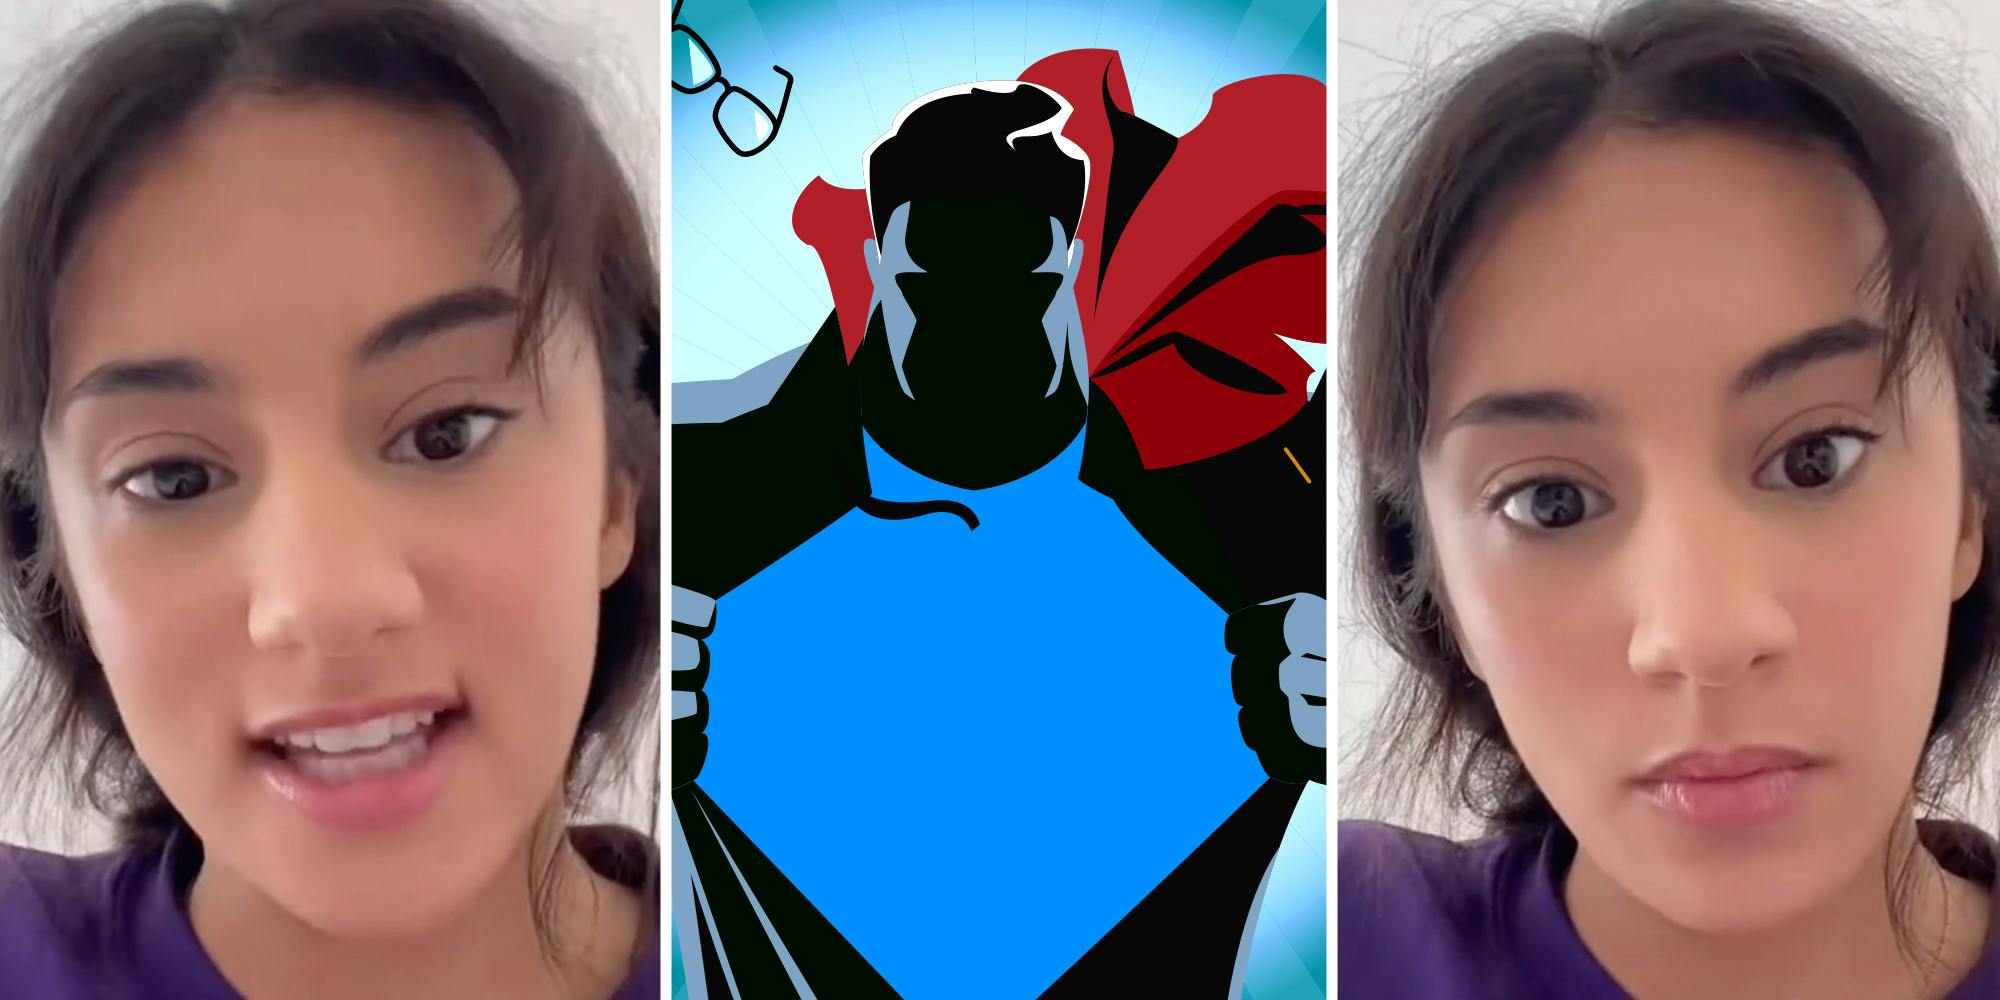 ‘You’re traditional’: Woman shares what men’s favorite superheroes say about them. Is she right?